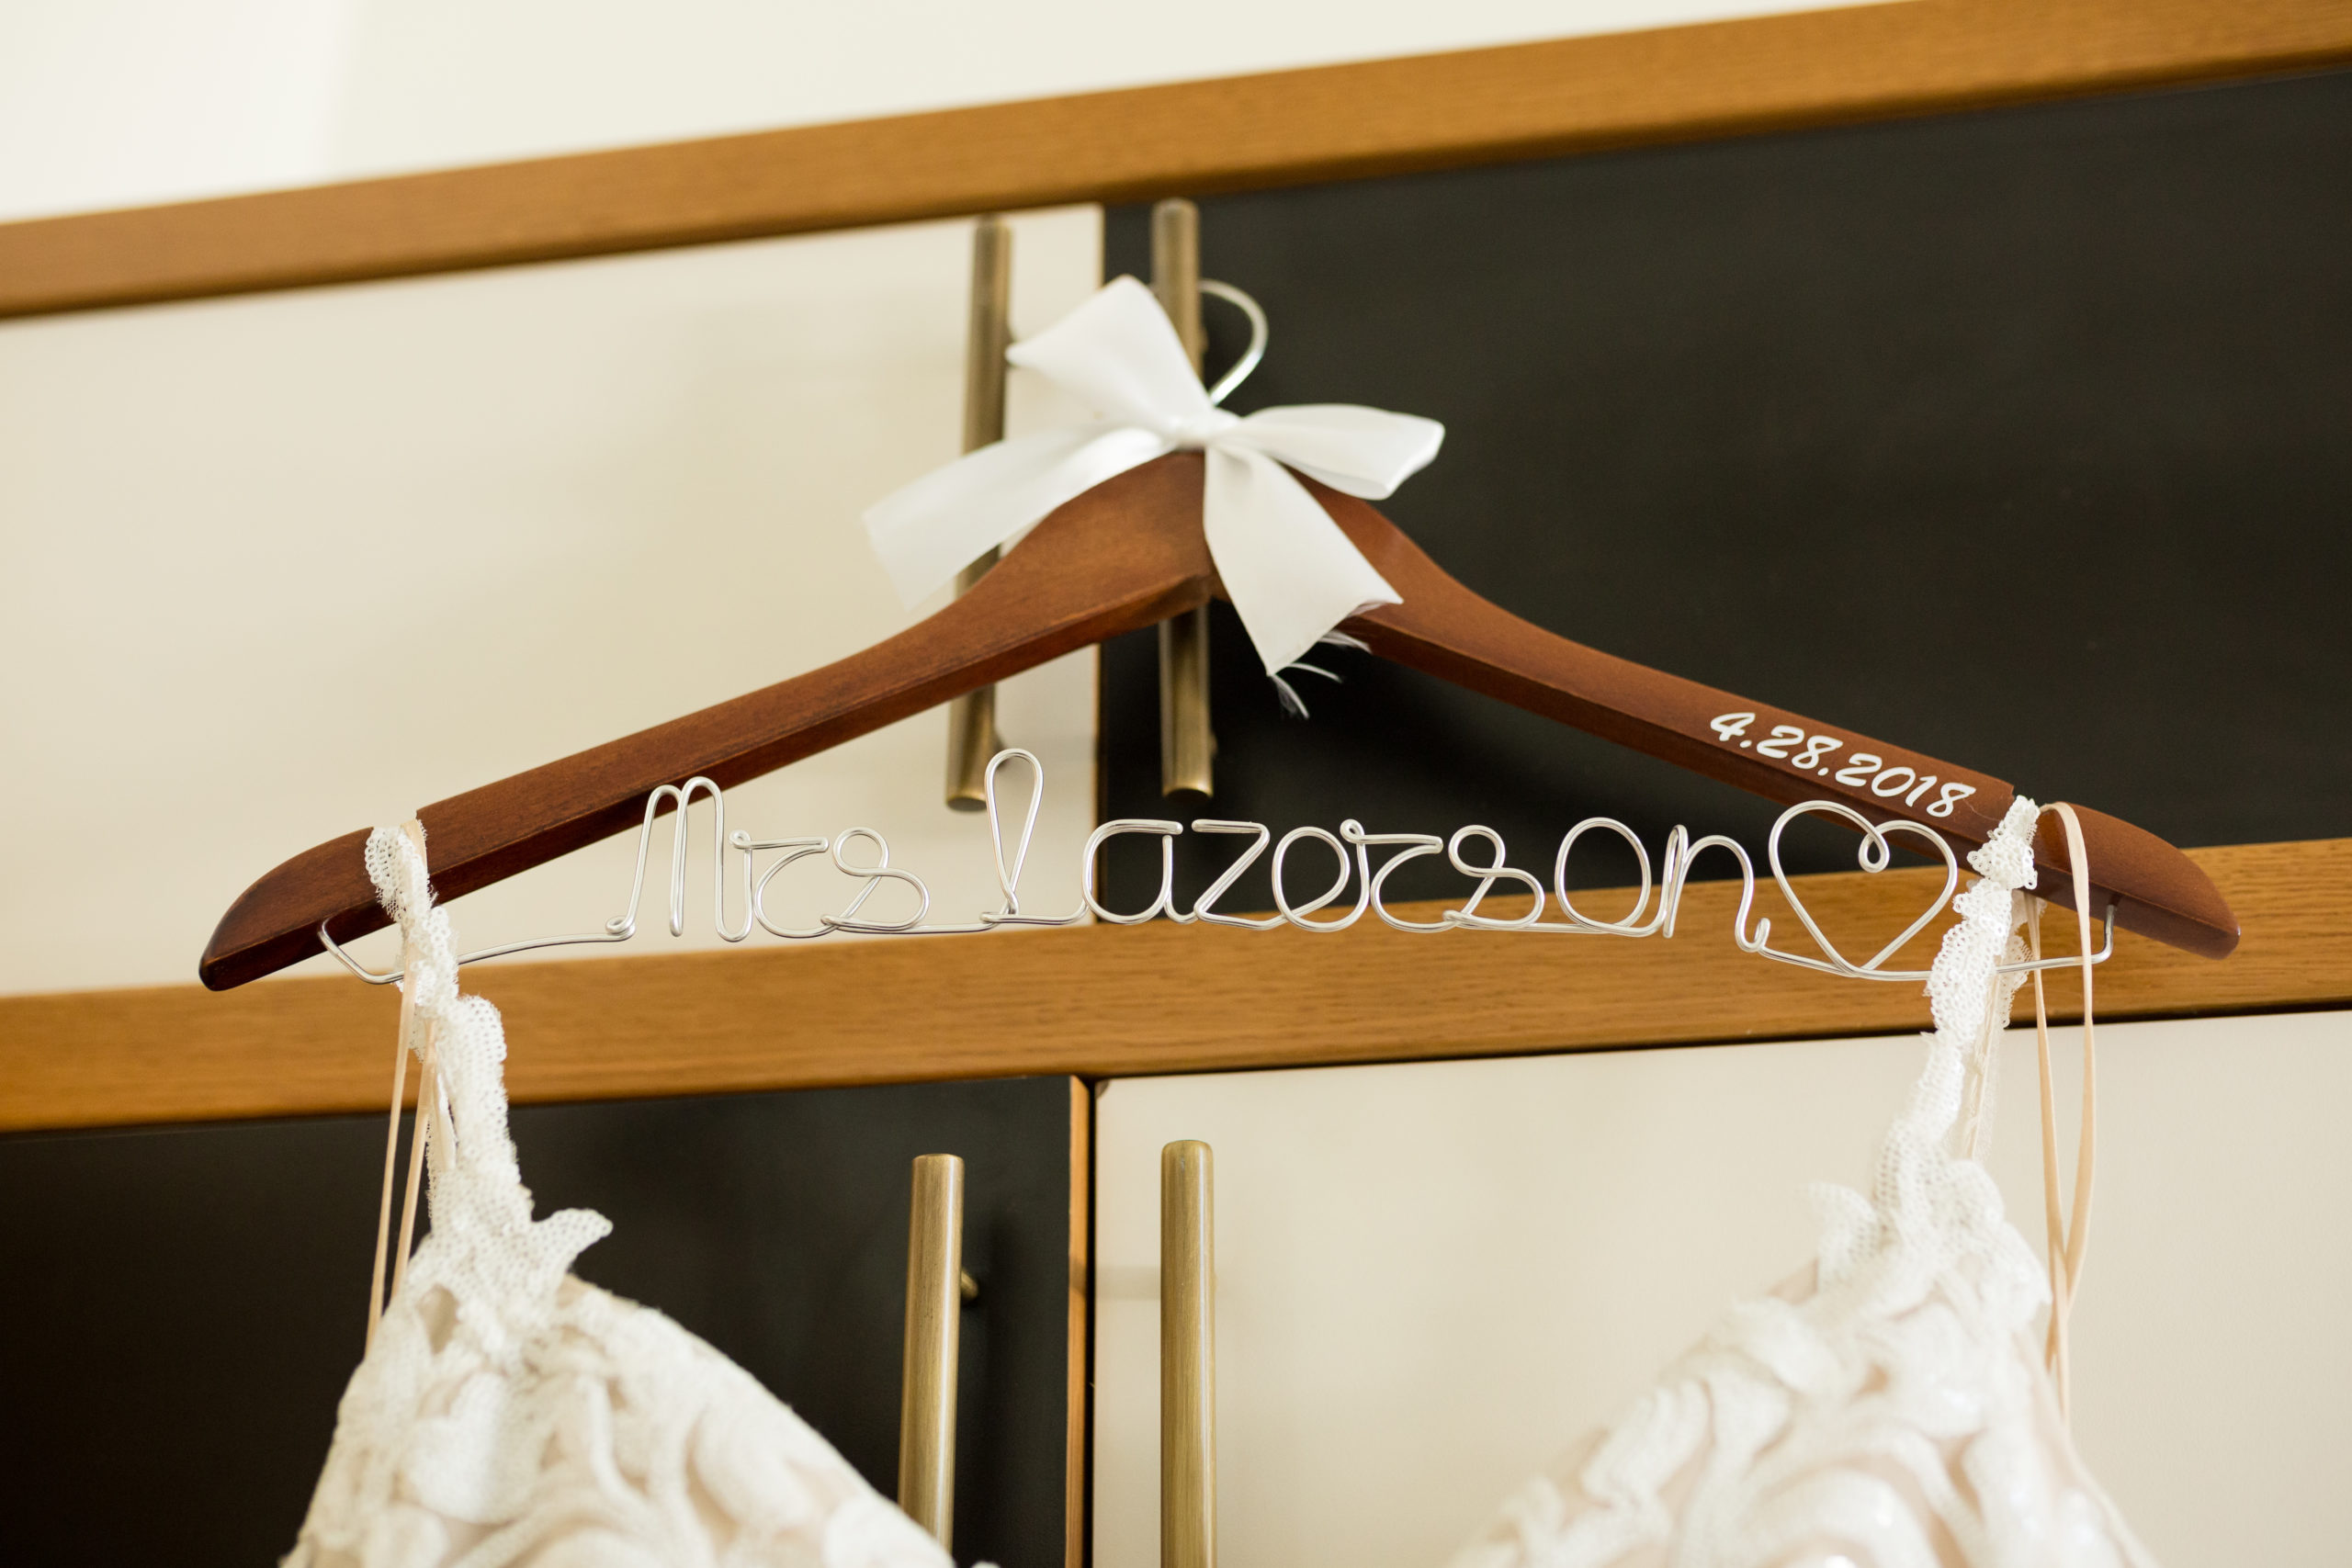 The bride's dress hung on a custom wire hanger with her name on it